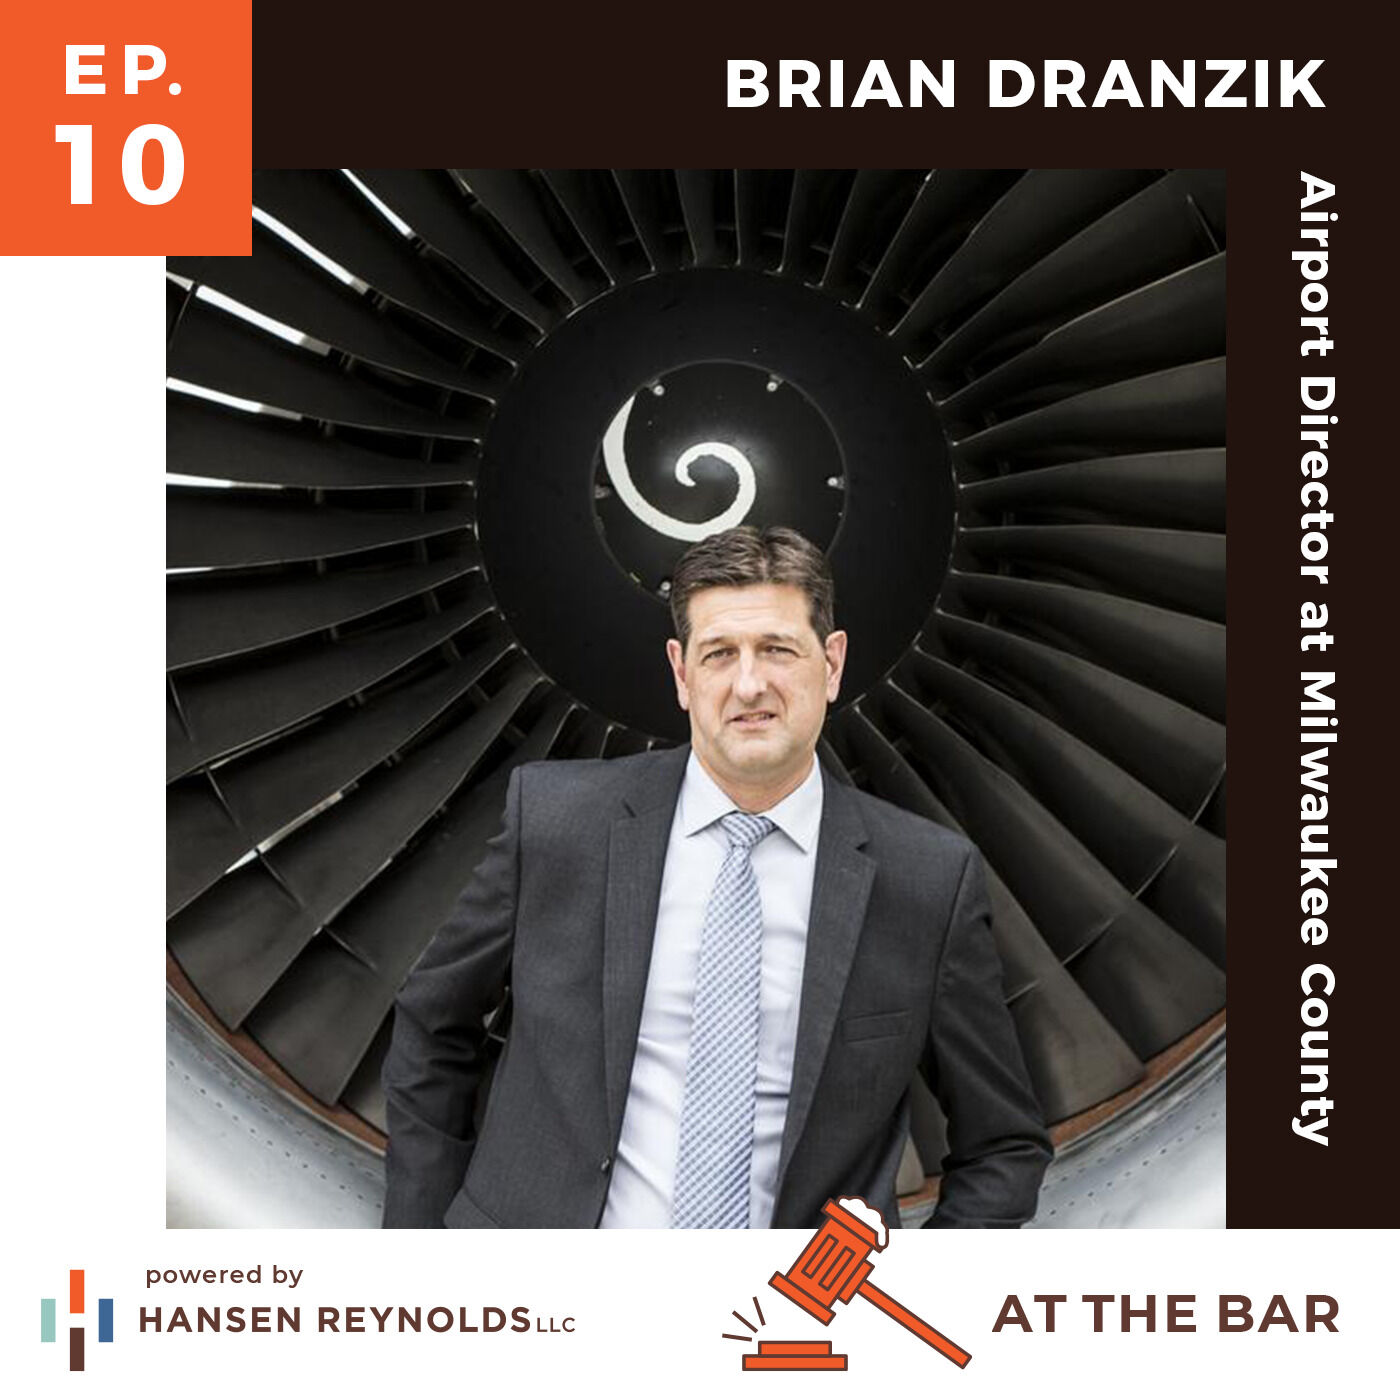 At the Bar episode ten cover with Brian Dranzik